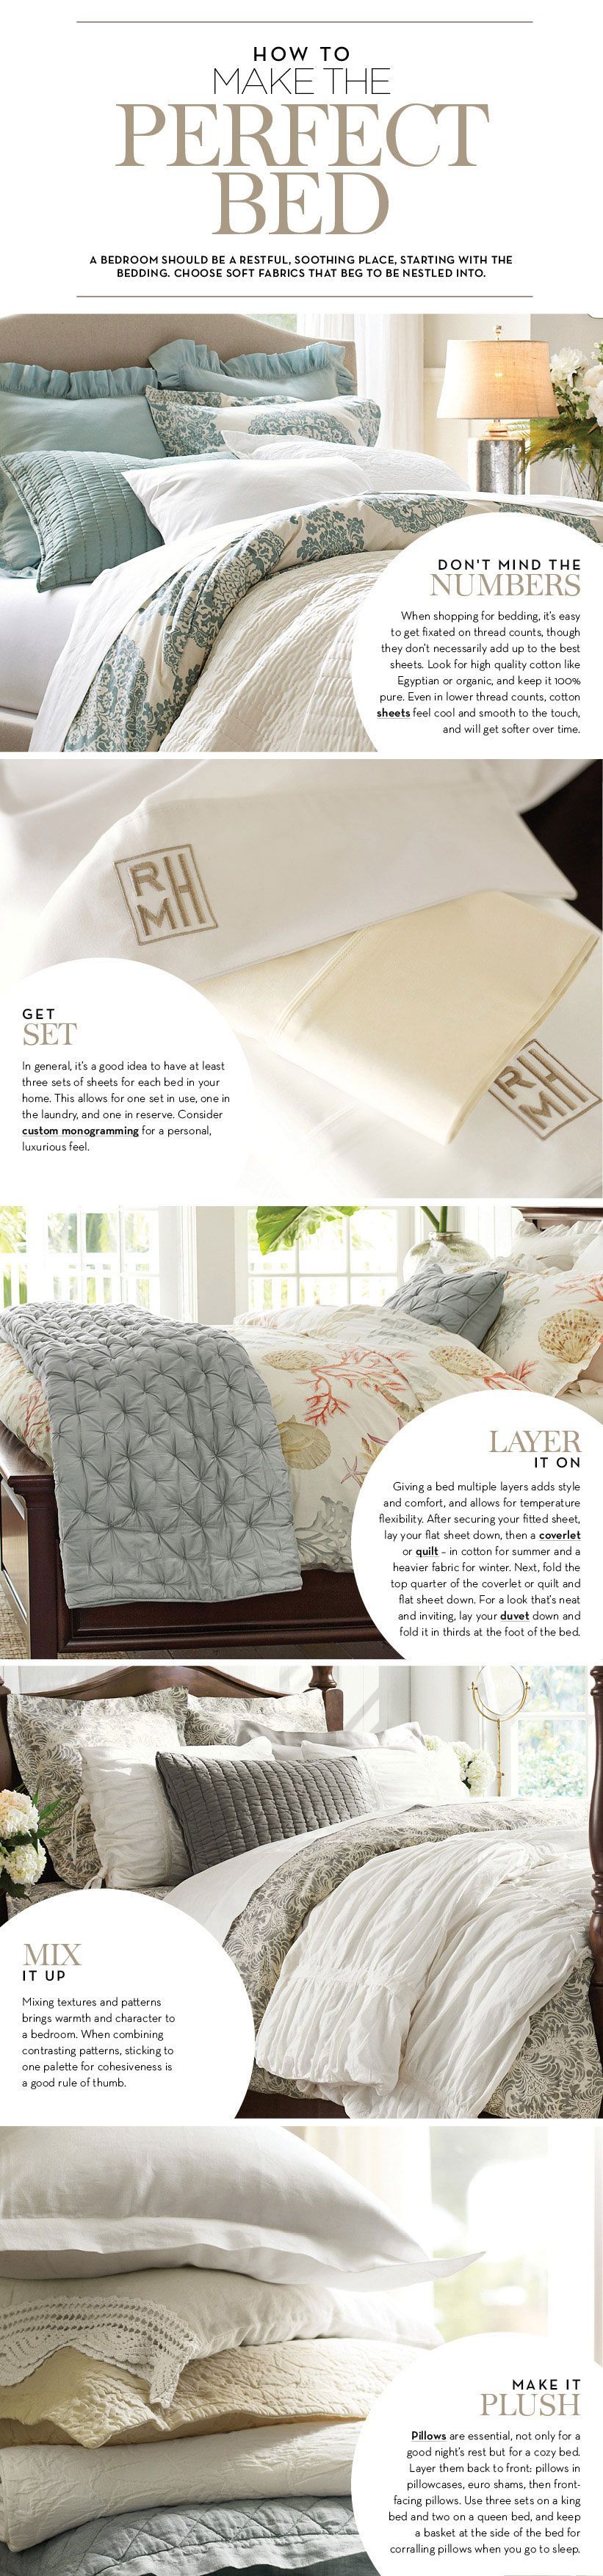 How to Make the Perfect Bed | Pottery Barn.  Tip: it’s a good idea to have 3 sets of sheets for every bed